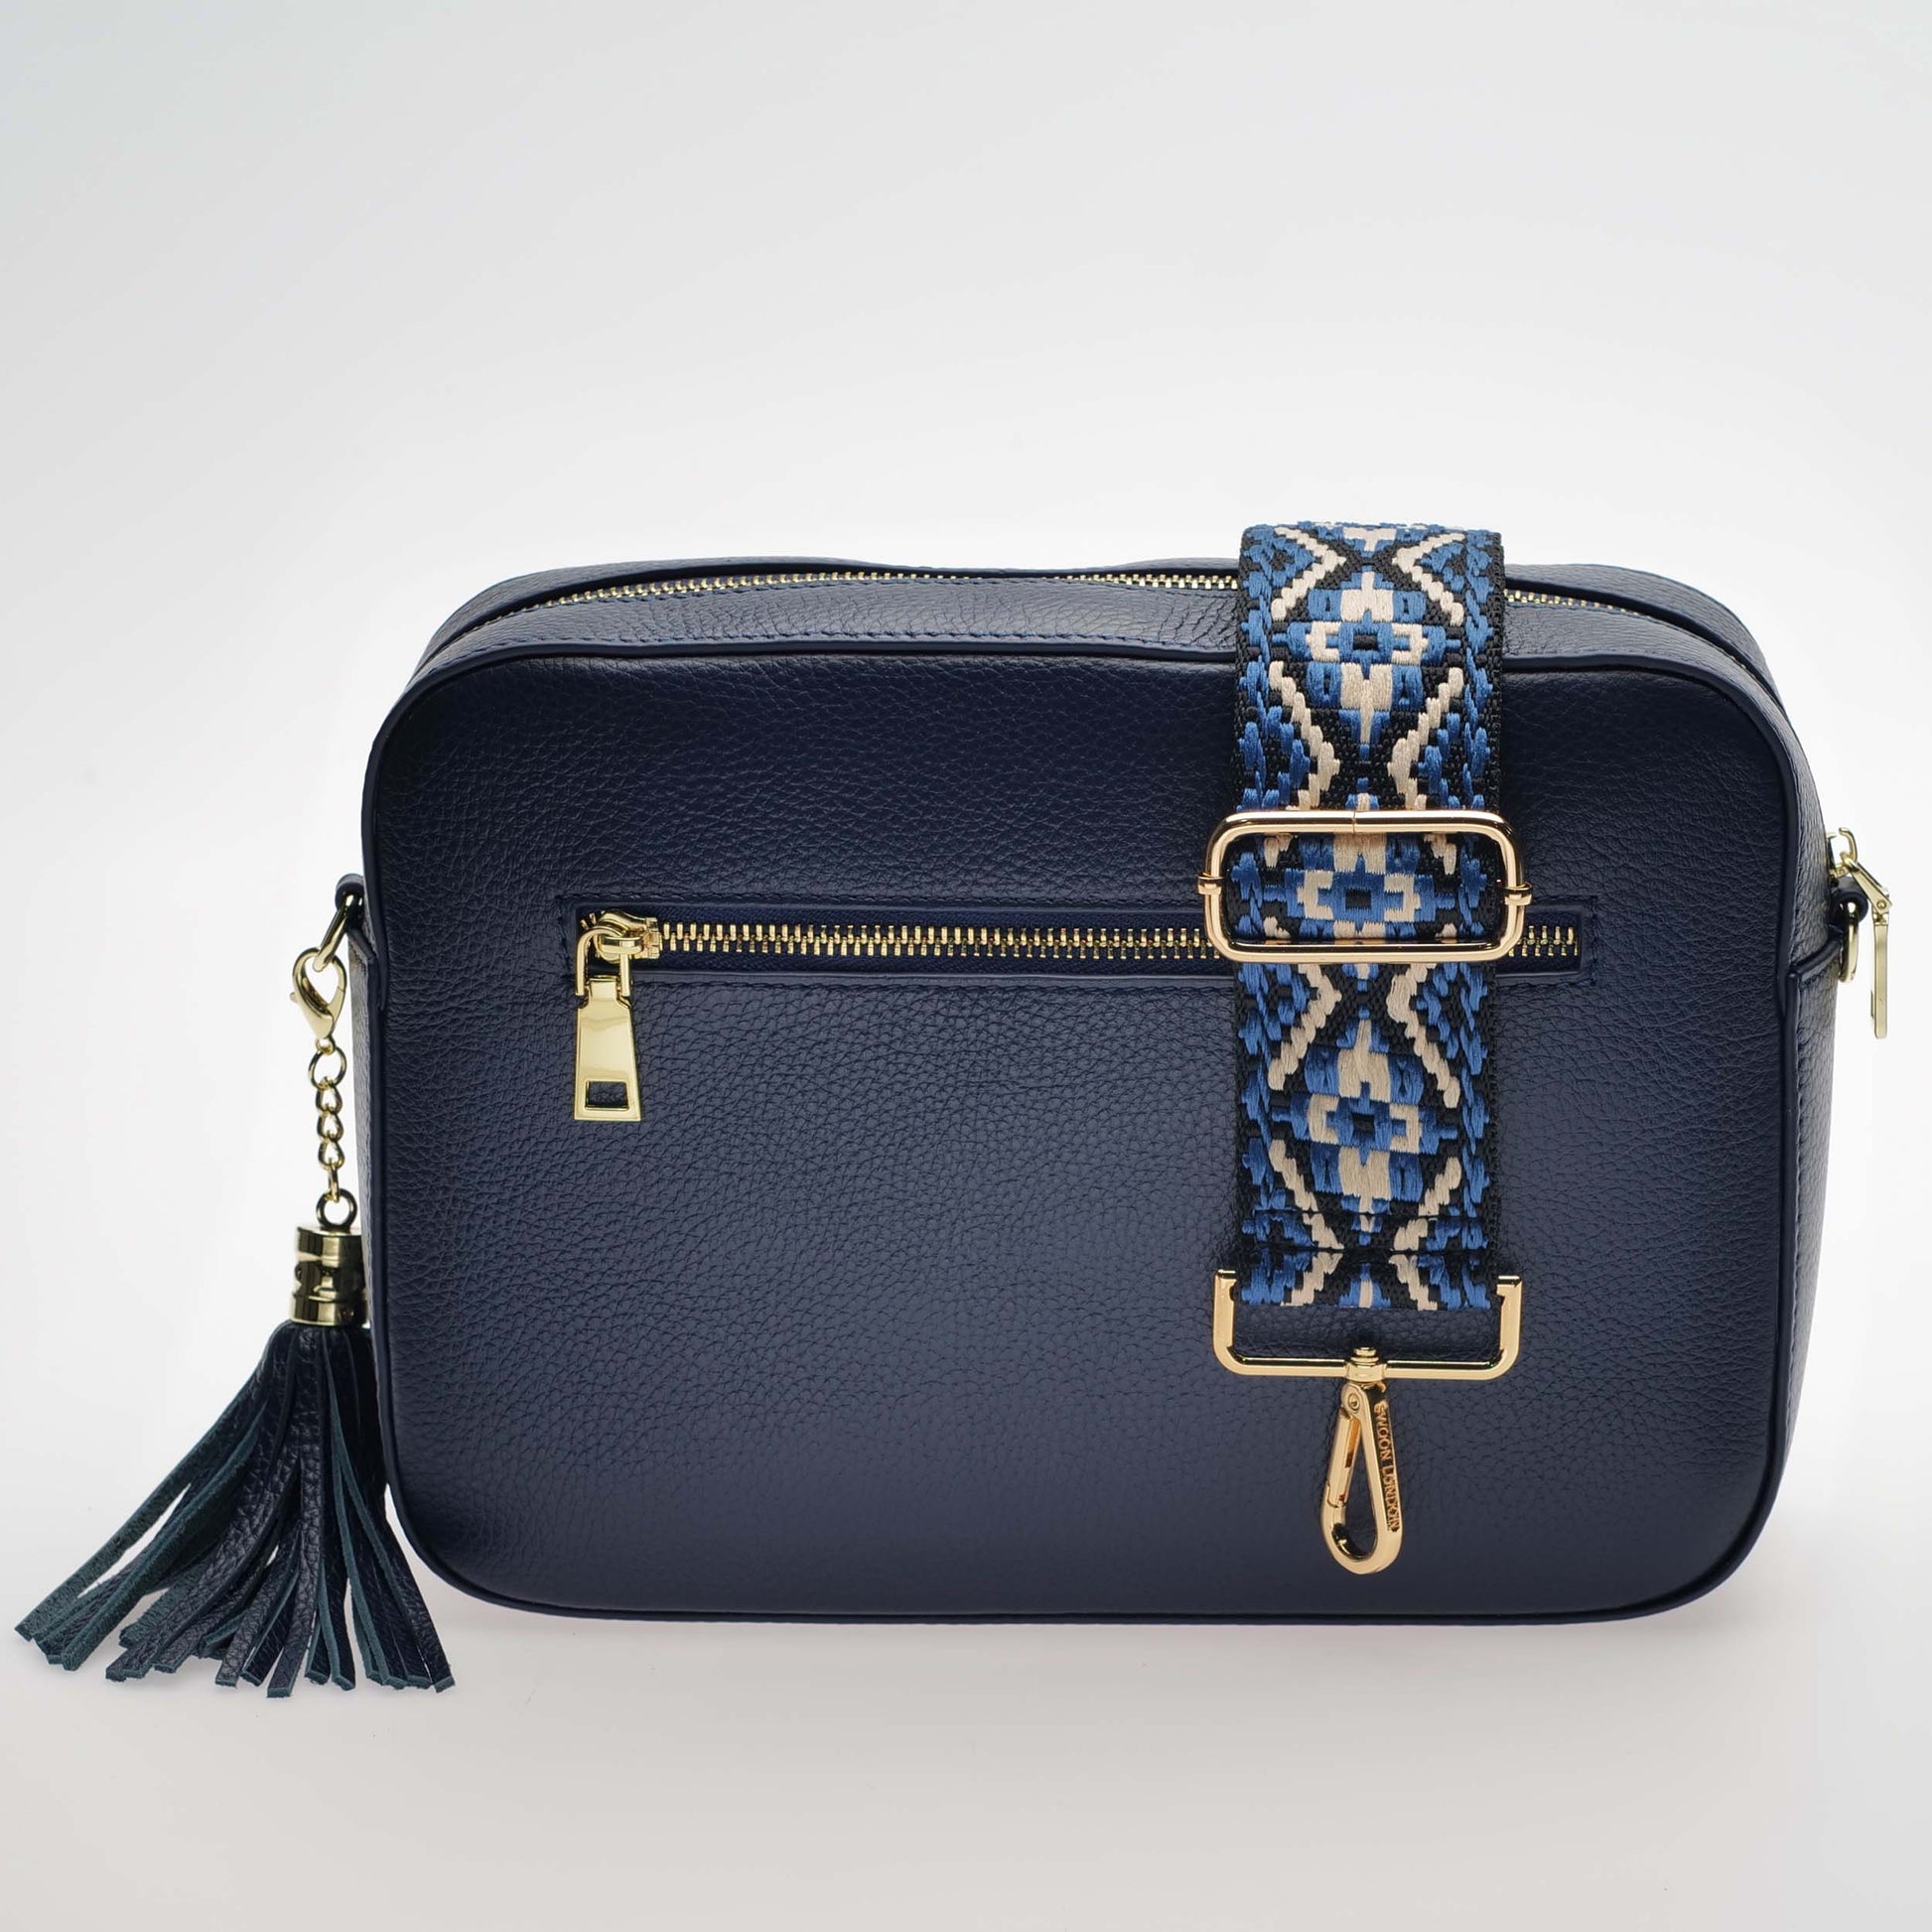 Blue Woven Aztec Strap by Swoon London